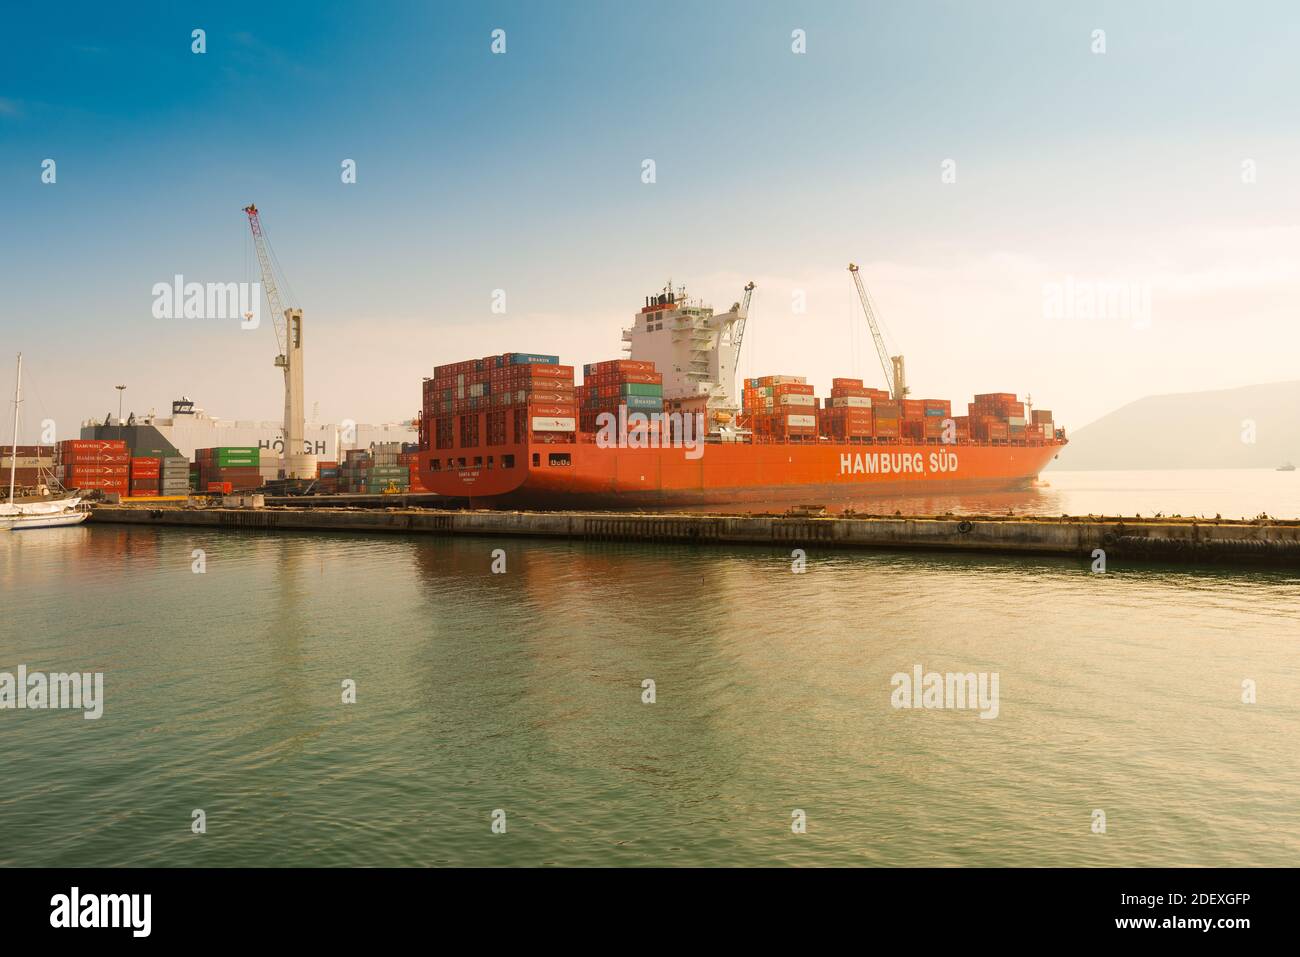 Iquique, Region de Tarapaca, Chile - Cargo ship loaded with containers docked at the port of Iquique. Stock Photo